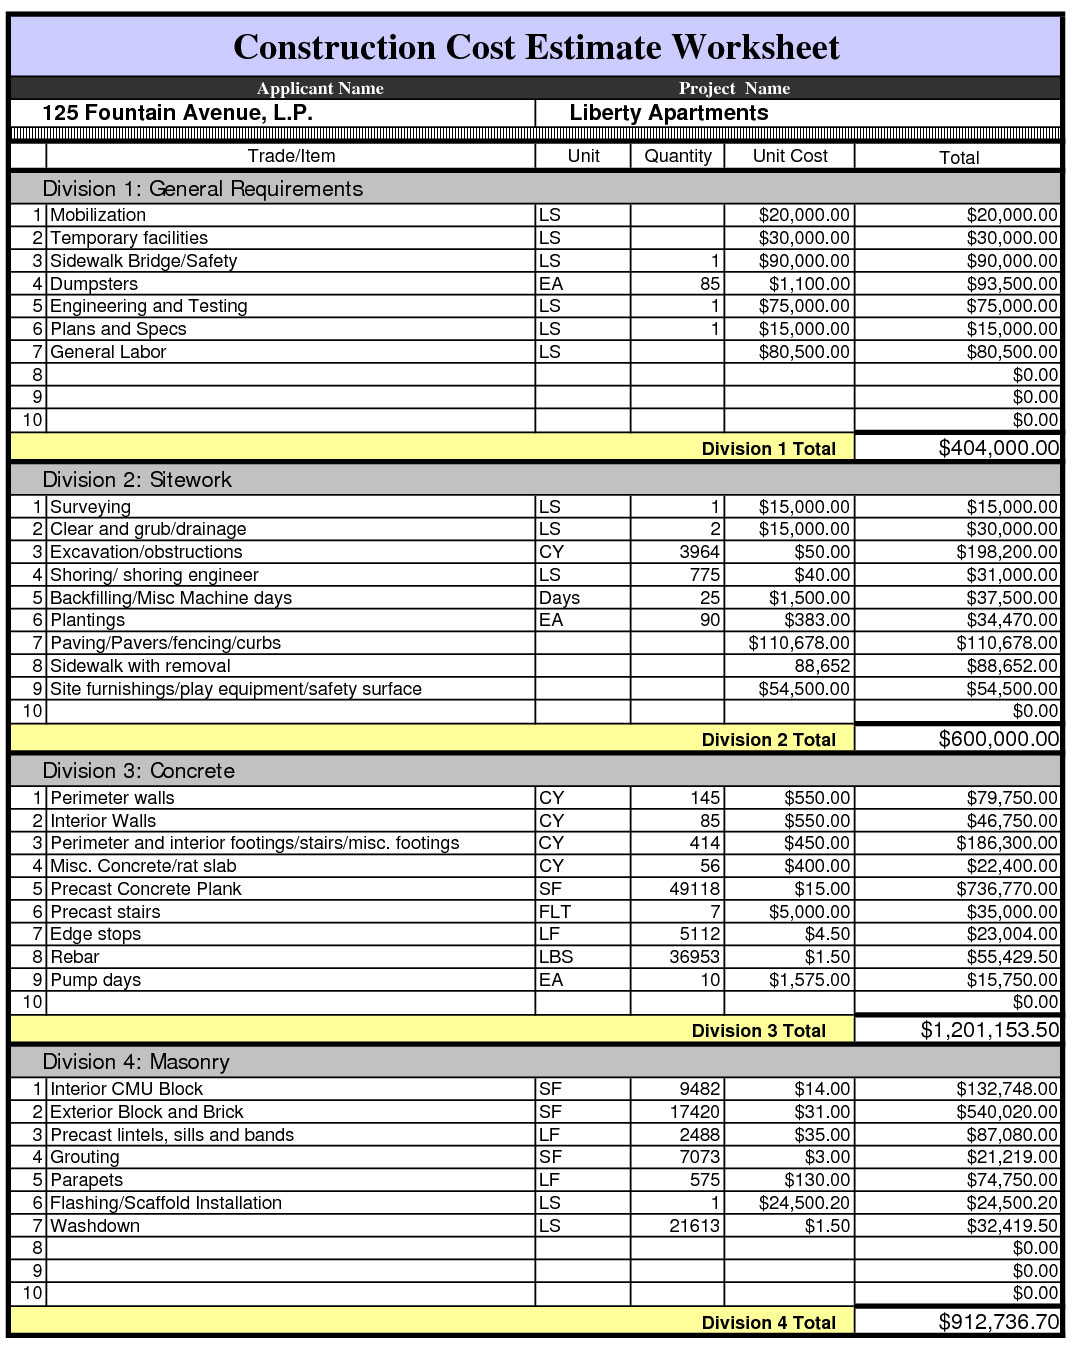 Construction Cost Estimate Worksheet And Construction Estimating Spreadsheets